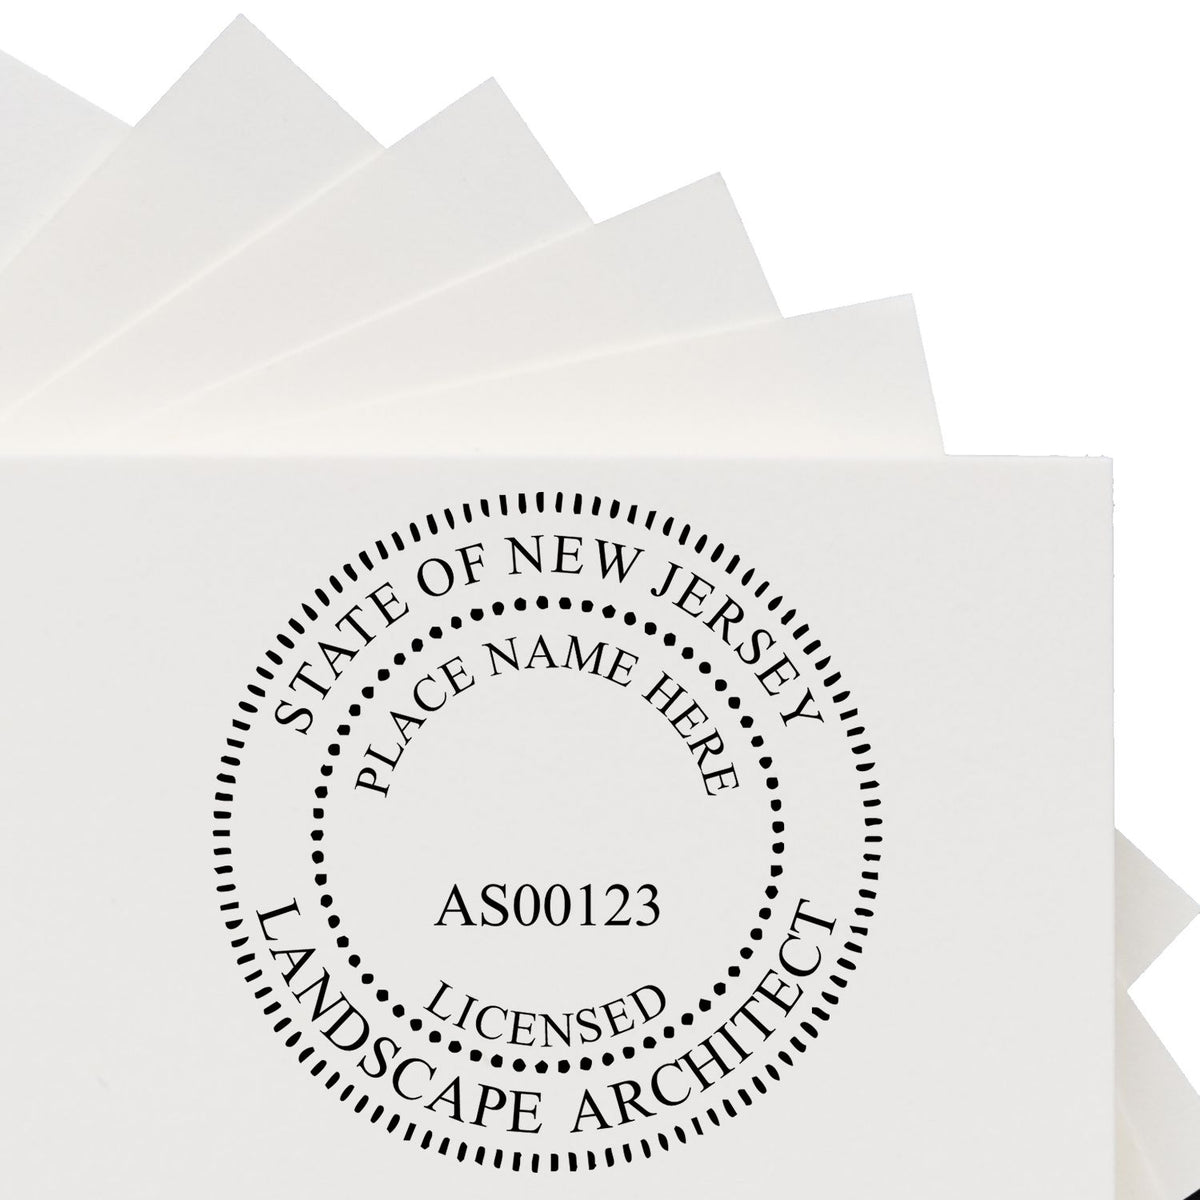 Slim Pre-Inked New Jersey Landscape Architect Seal Stamp in use photo showing a stamped imprint of the Slim Pre-Inked New Jersey Landscape Architect Seal Stamp